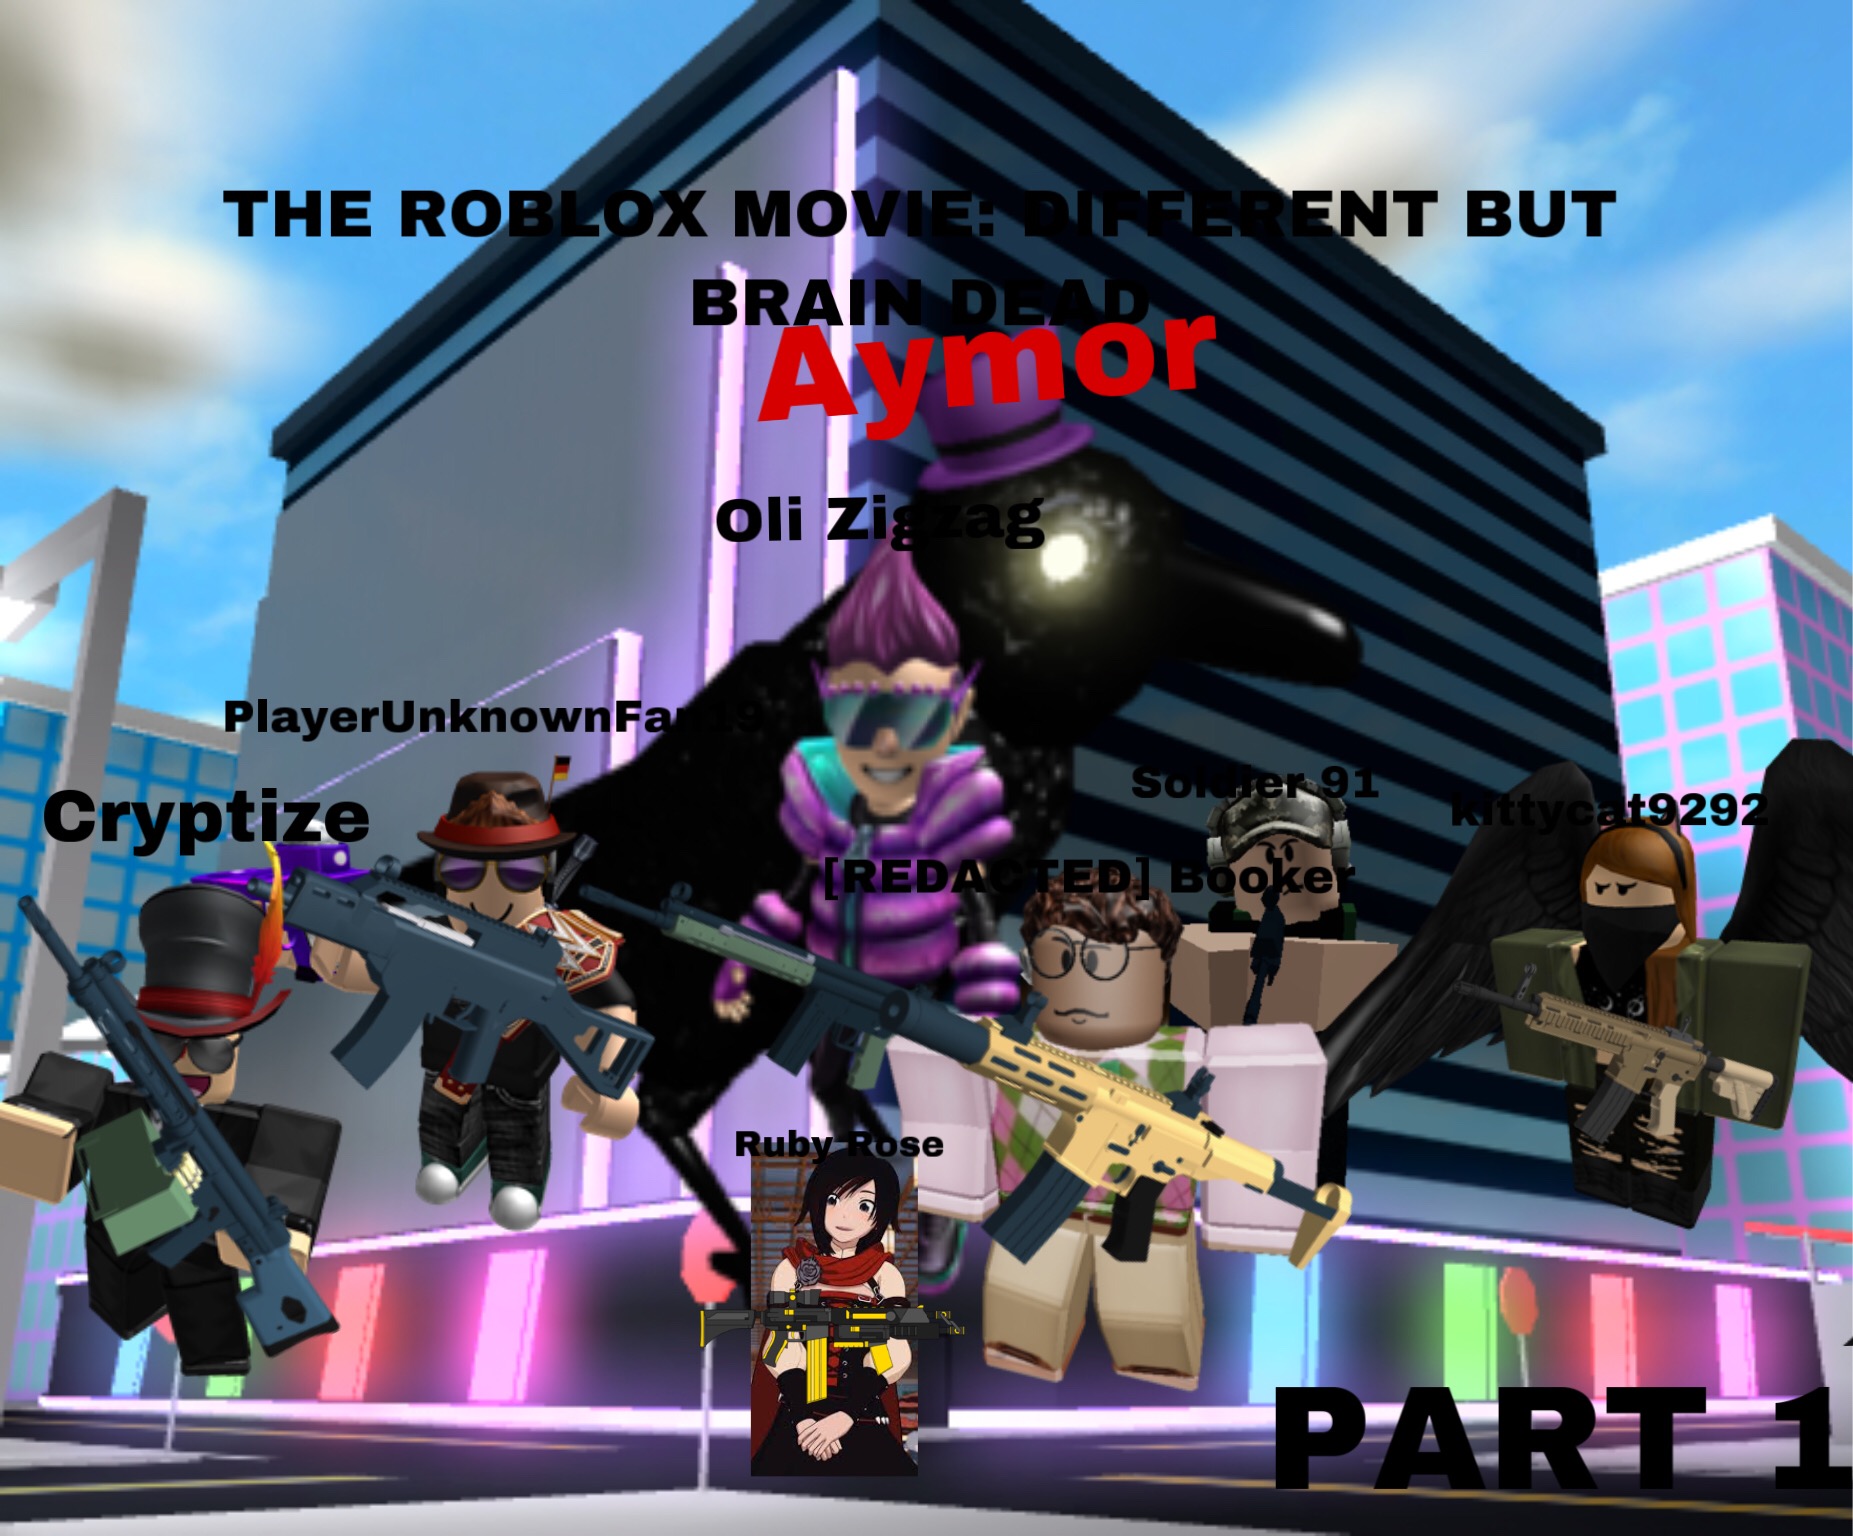 The Roblox Movie Different But Brain Dead The Roblox Movie Wiki Fandom - roblox movie 1